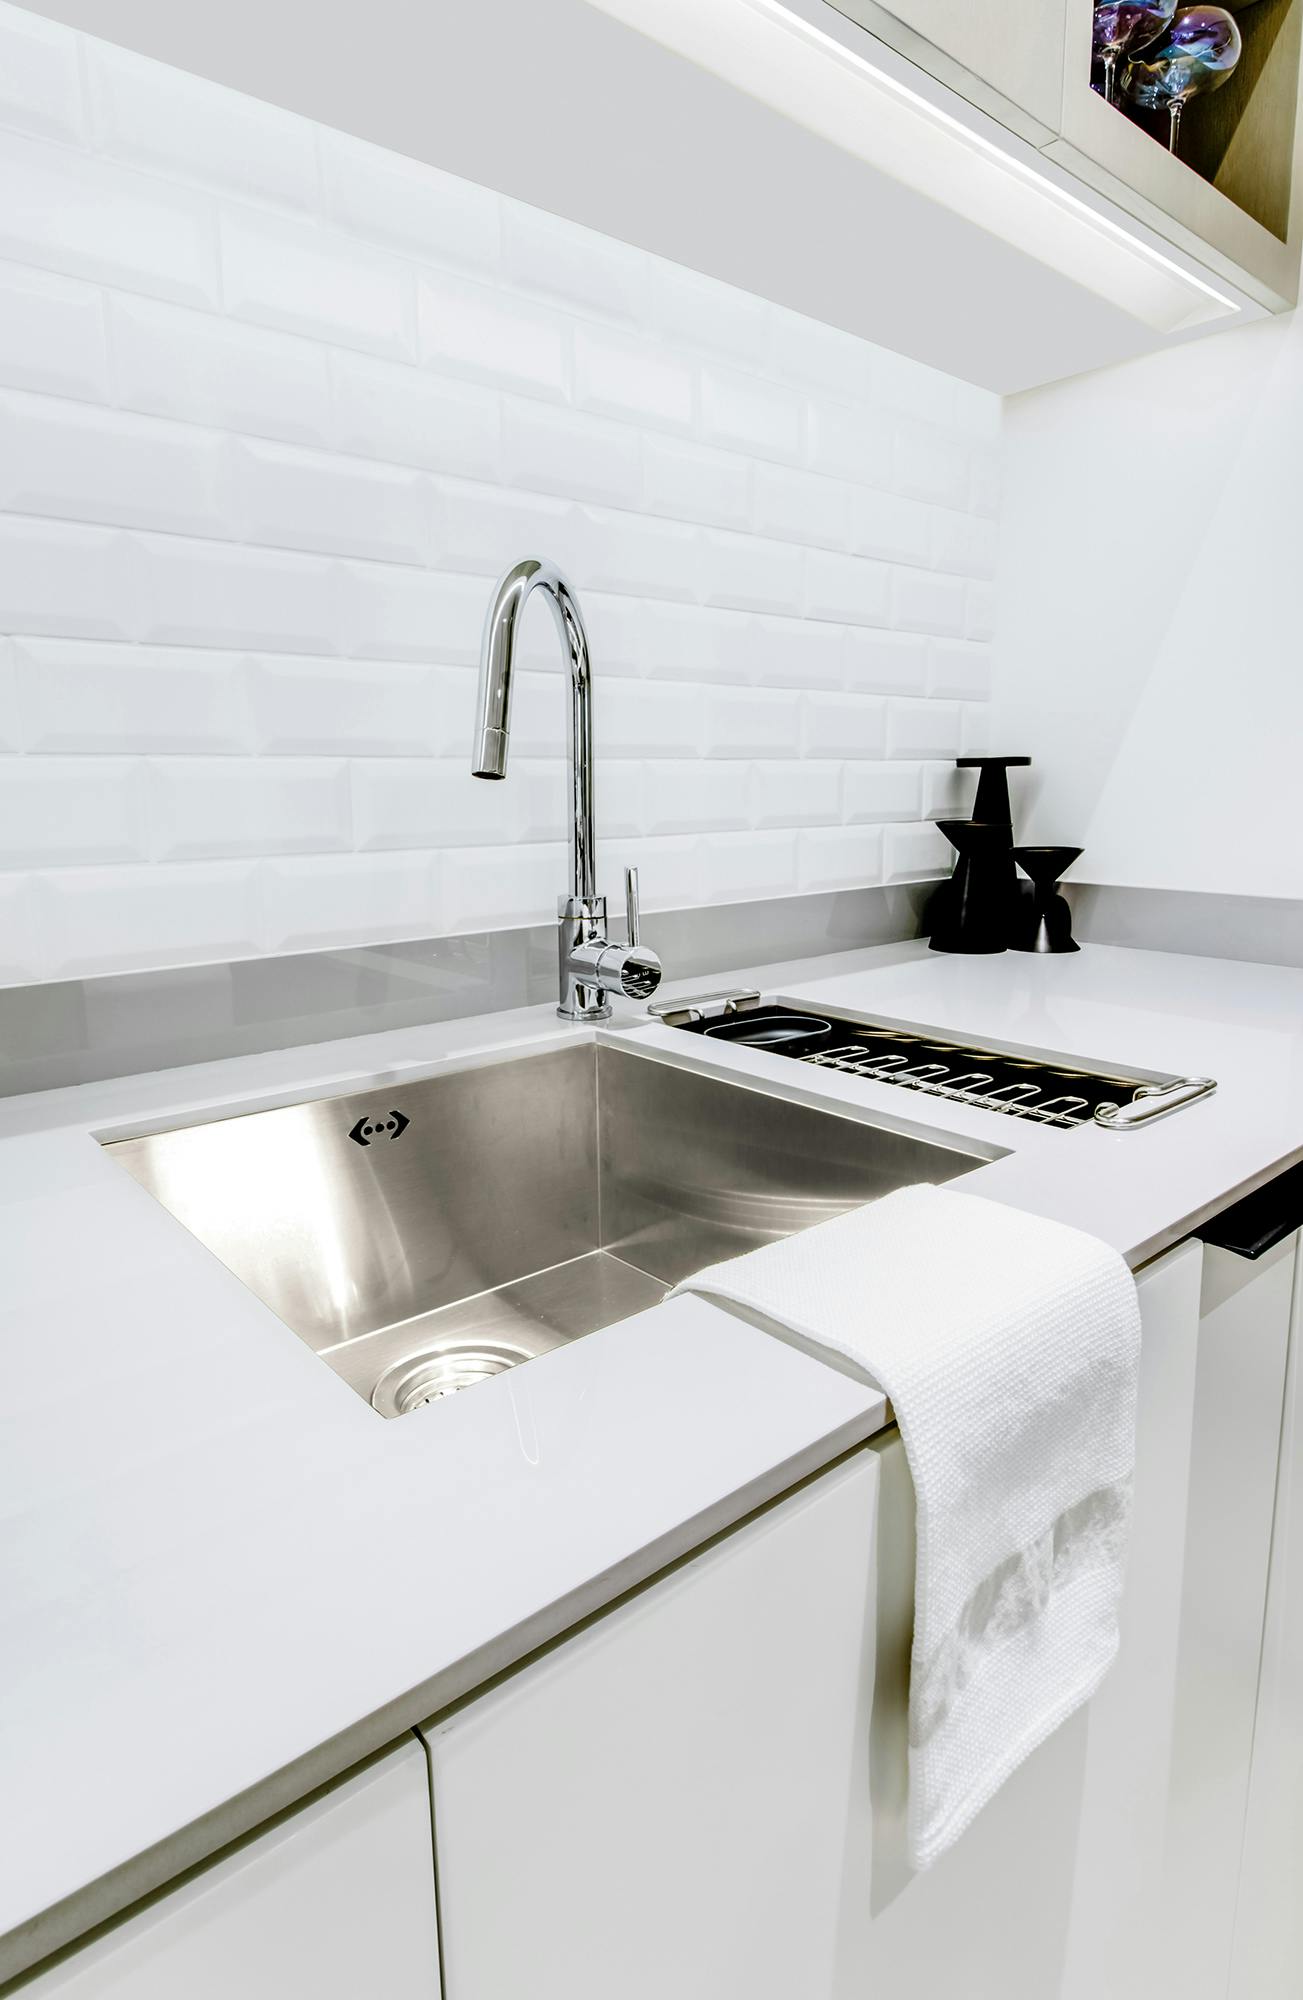 https://imgix.cosentino.com/usa/wp-content/uploads/2023/05/Belgravia-Heights-I-Show-Apartment-Kitchen-Sink-Detail.jpg?auto=format%2Ccompress&fit=crop&ixlib=php-3.3.0&max-h=1688&max-w=1100